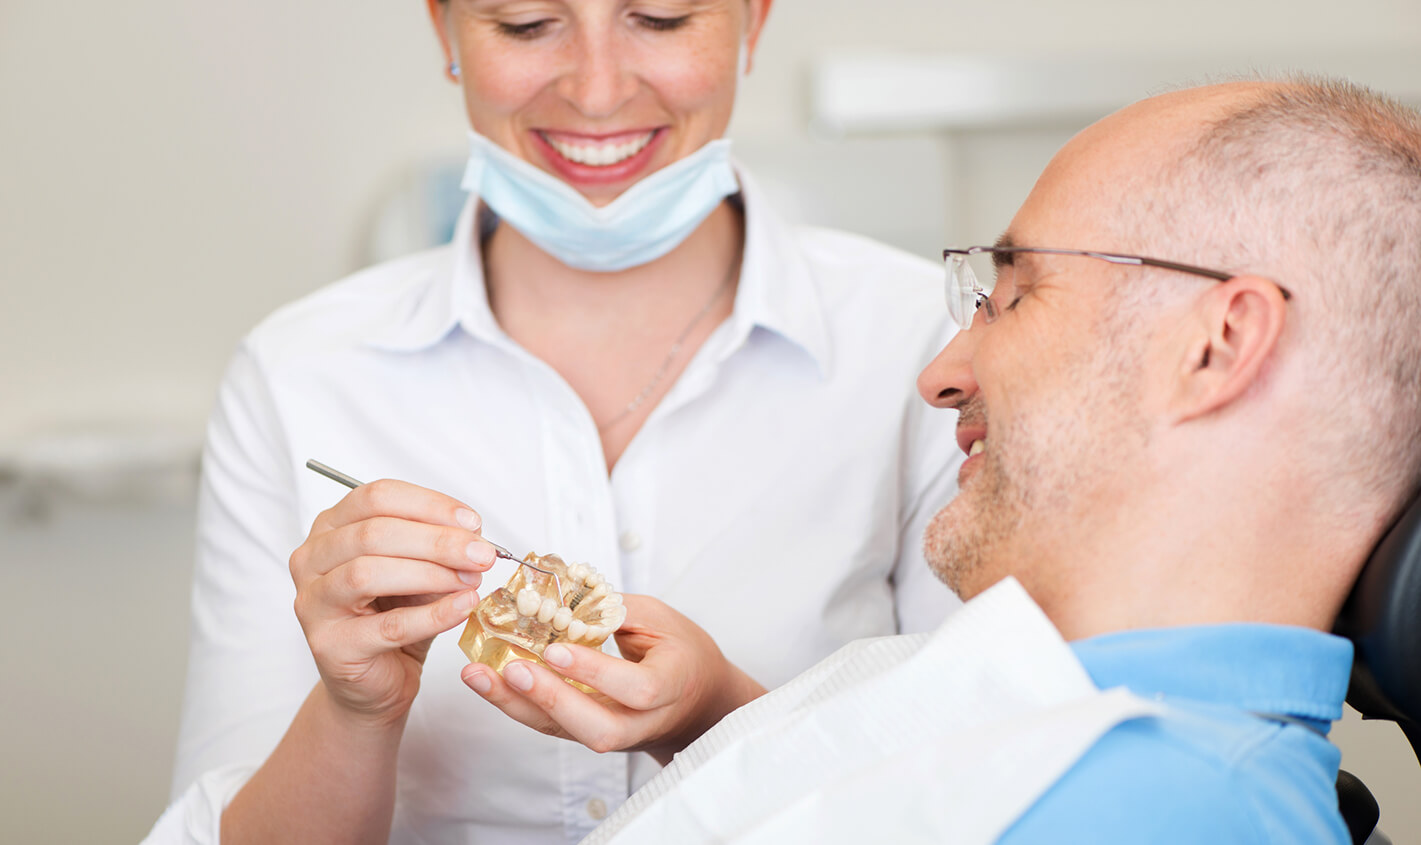 Common Reasons Why You May Need Endodontic Services from a Dentist in Tucson, AZ